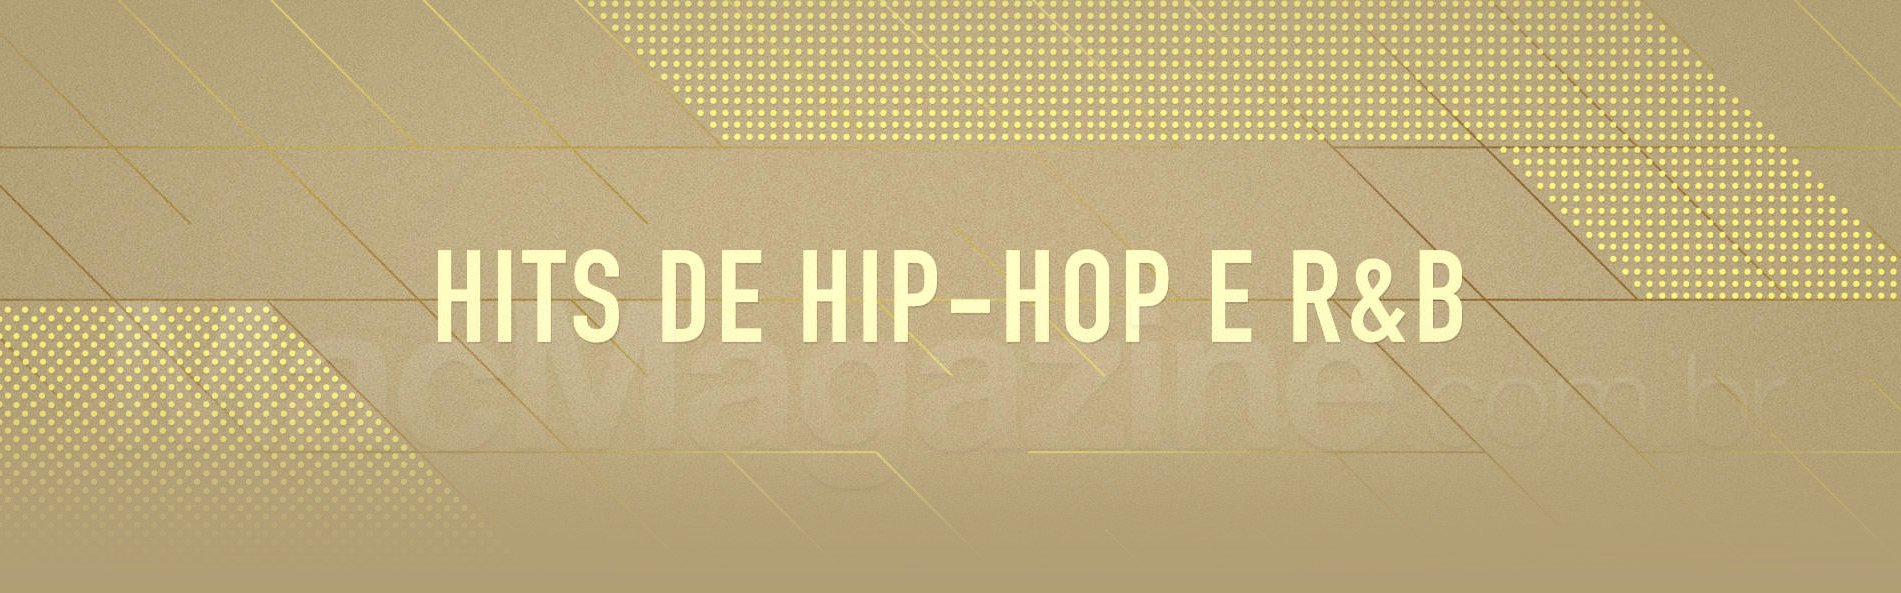 Hip-Hop + R&B hits: albums starting at $ 5, for a limited time on the iTunes Store